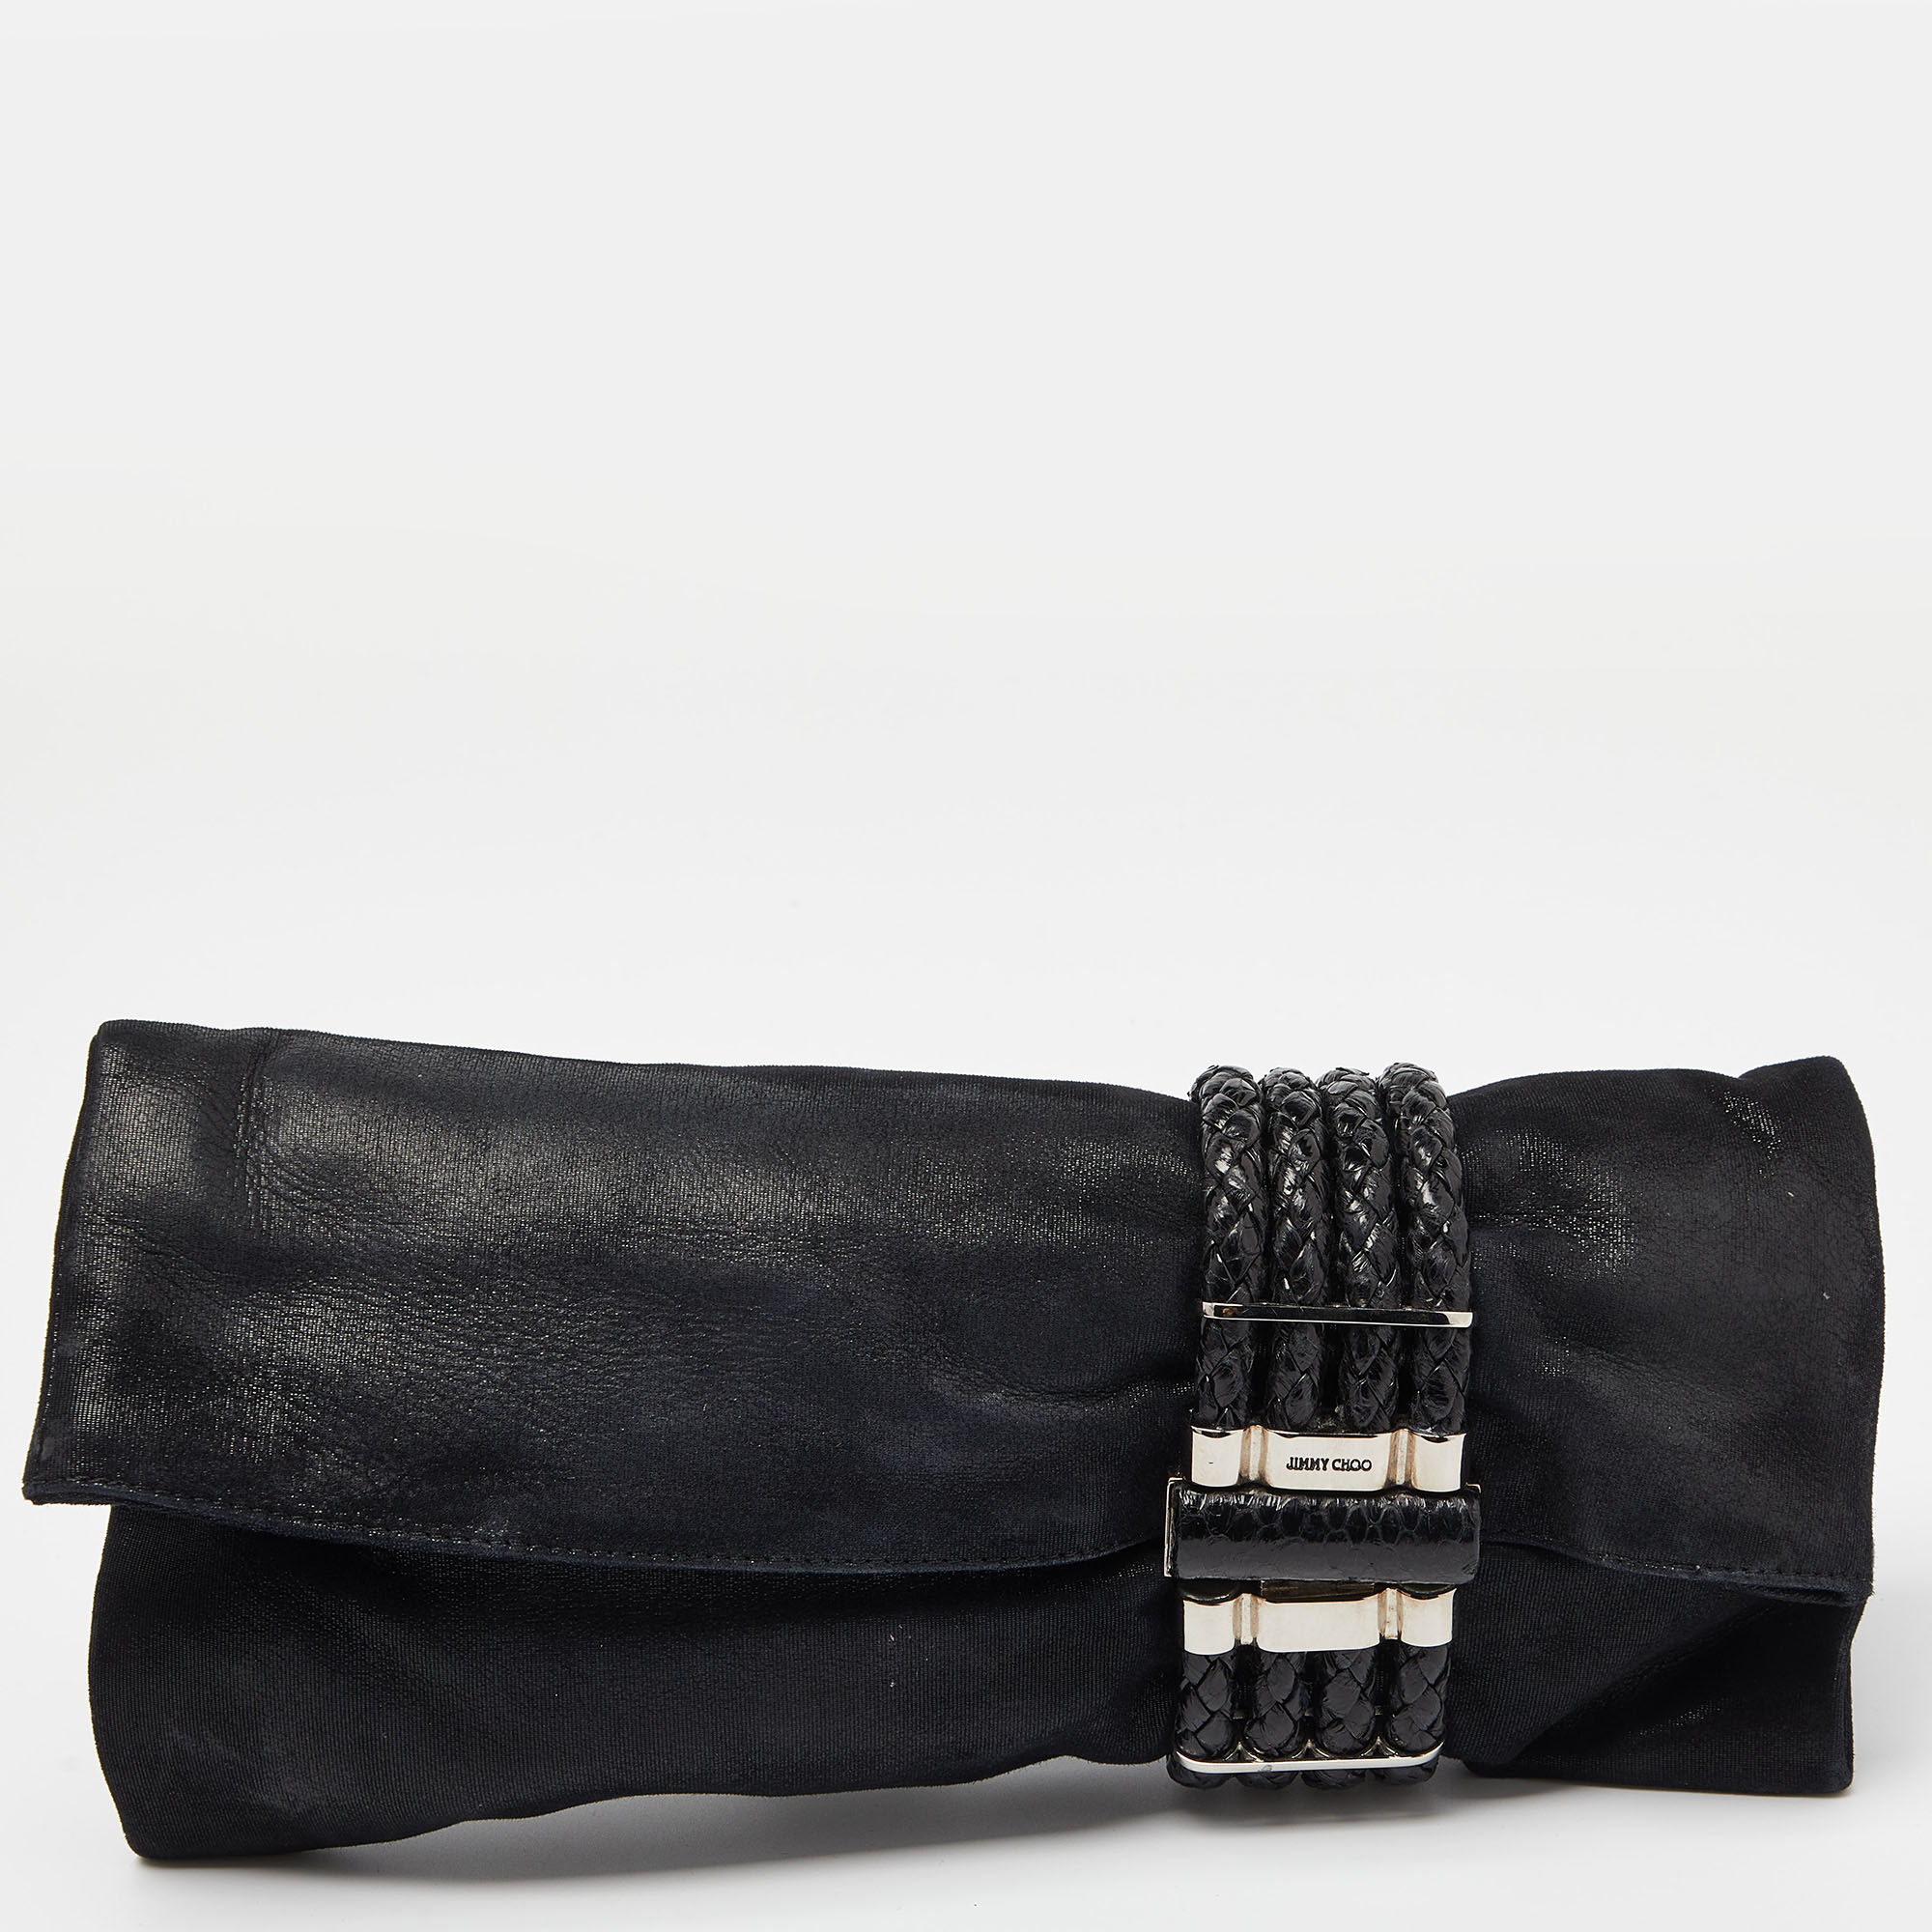 

Jimmy Choo Black Iridescent Suede and Snakeskin Chandra Clutch